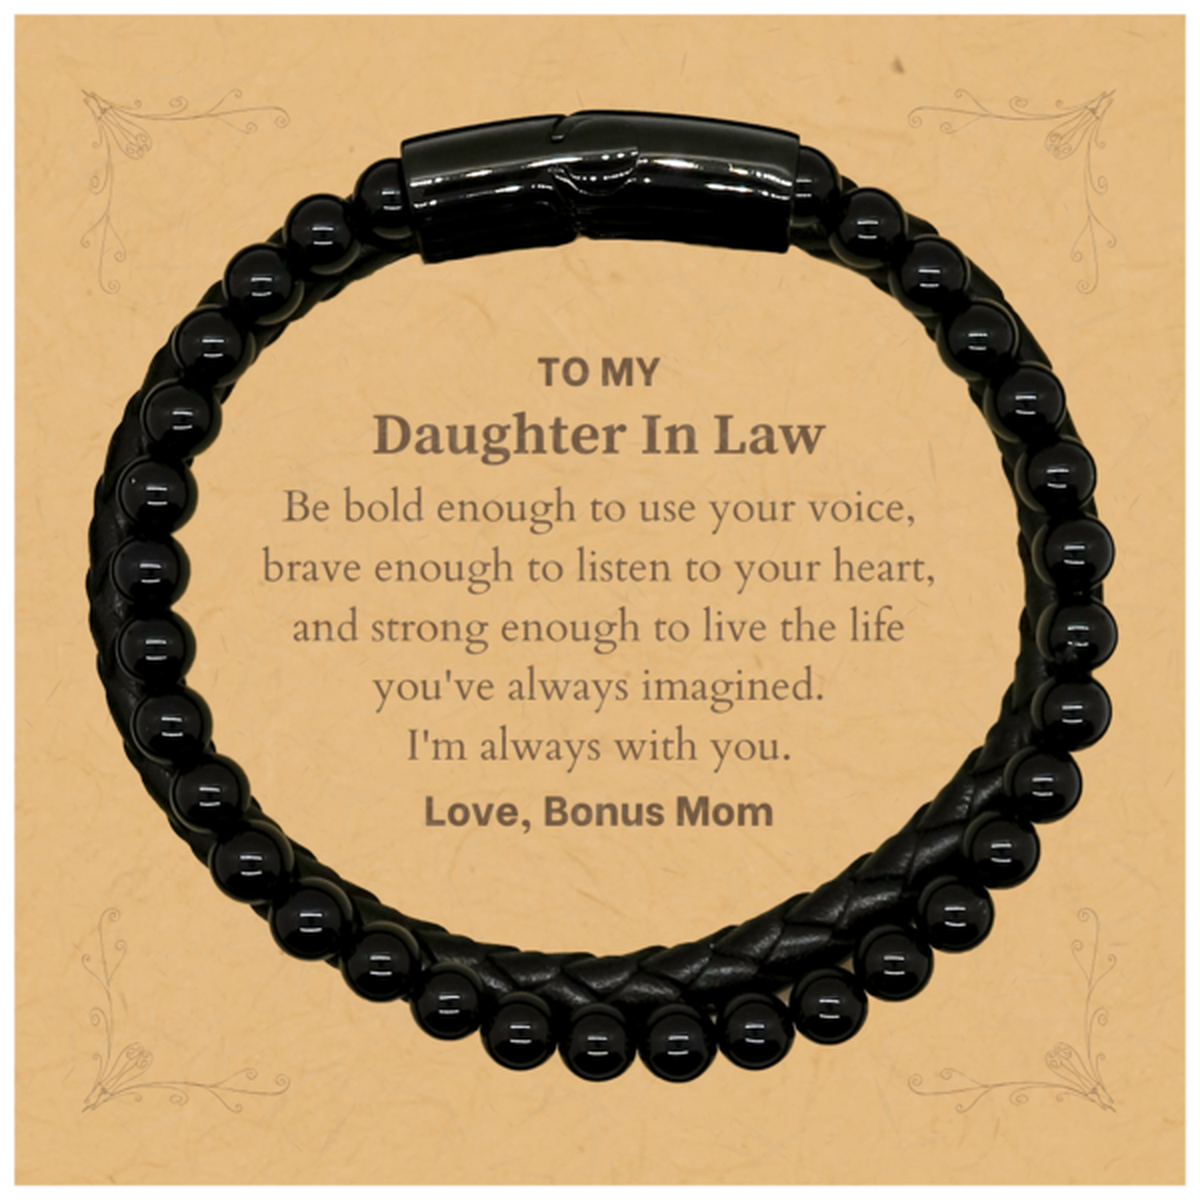 Keepsake Daughter In Law Stone Leather Bracelets Gift Idea Graduation Christmas Birthday Daughter In Law from Bonus Mom, Daughter In Law Be bold enough to use your voice, brave enough to listen to your heart. Love, Bonus Mom